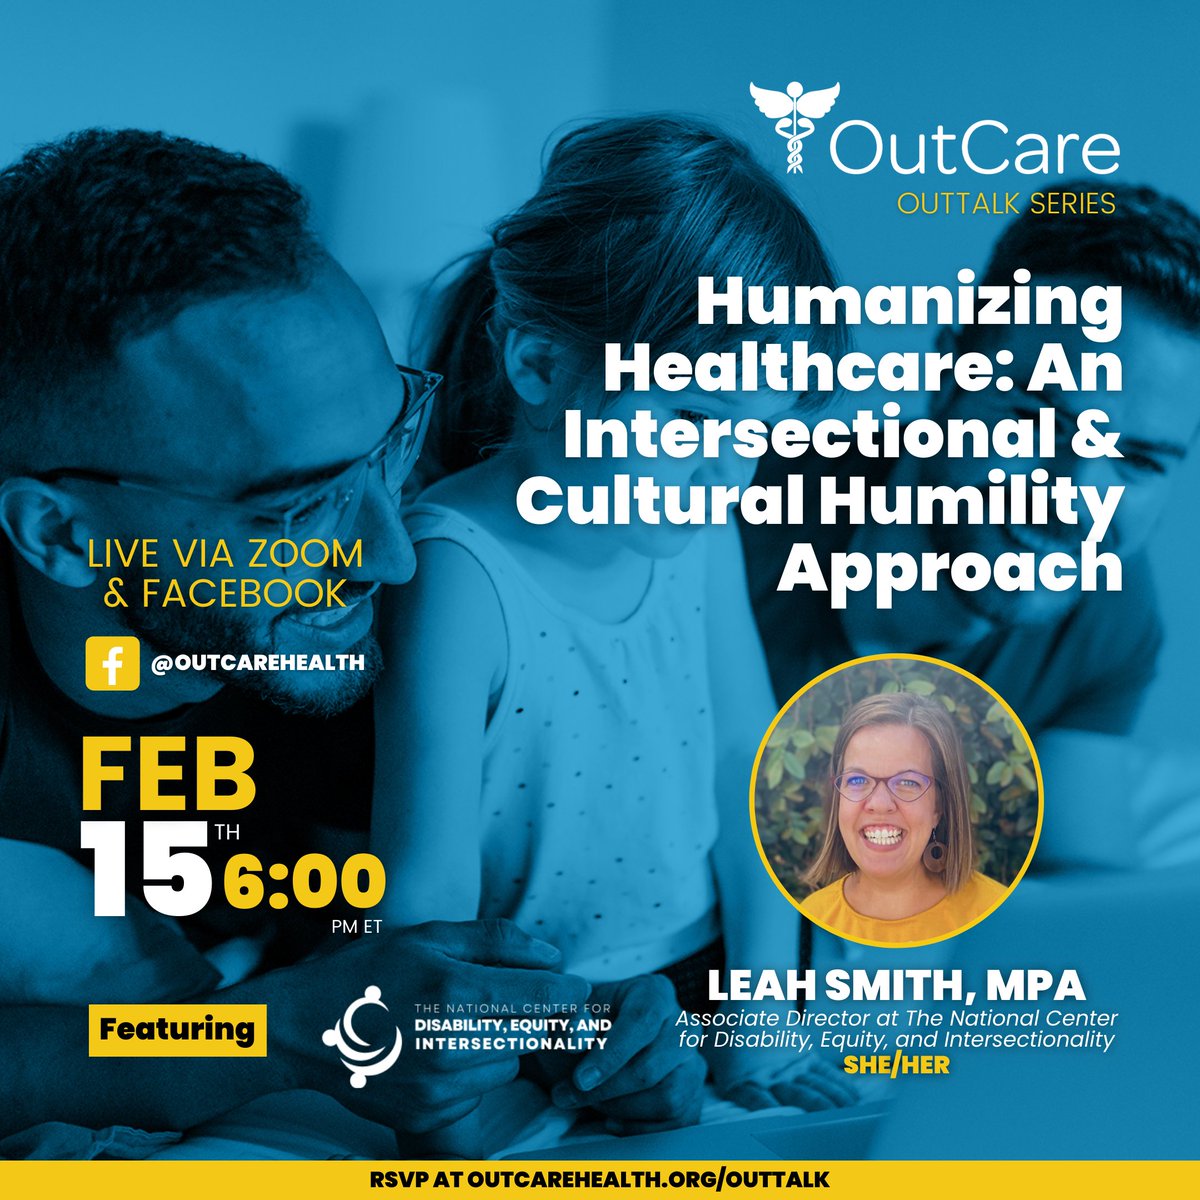 Tomorrow, on the #OutTalkSeries, meet Leah Smith, MPA, the Associate Director at @ThinkEquitable! ✨She has identified and addressed healthcare inequities facing people with disabilities at the intersections of other marginalized identities. 🔗📲 outcarehealth.org/outtalk⚕️🏳️‍🌈